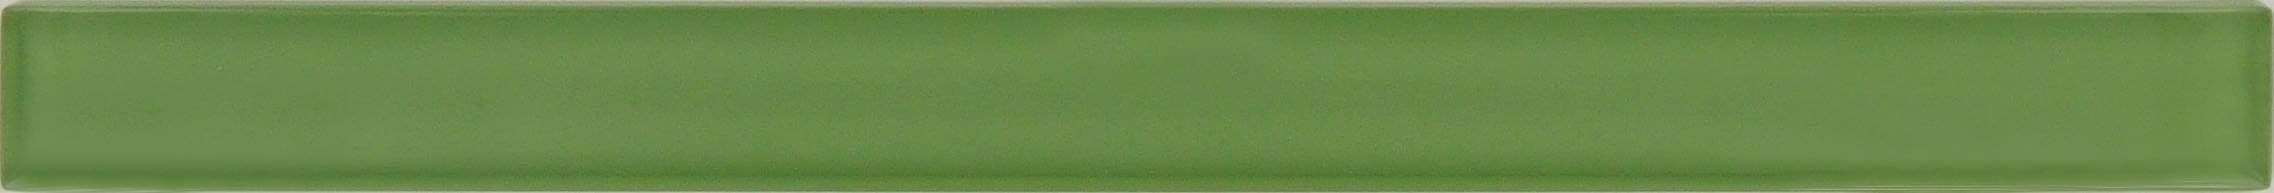 Grassy Green 1" x 12" Glossy Glass Liner Millenium Products